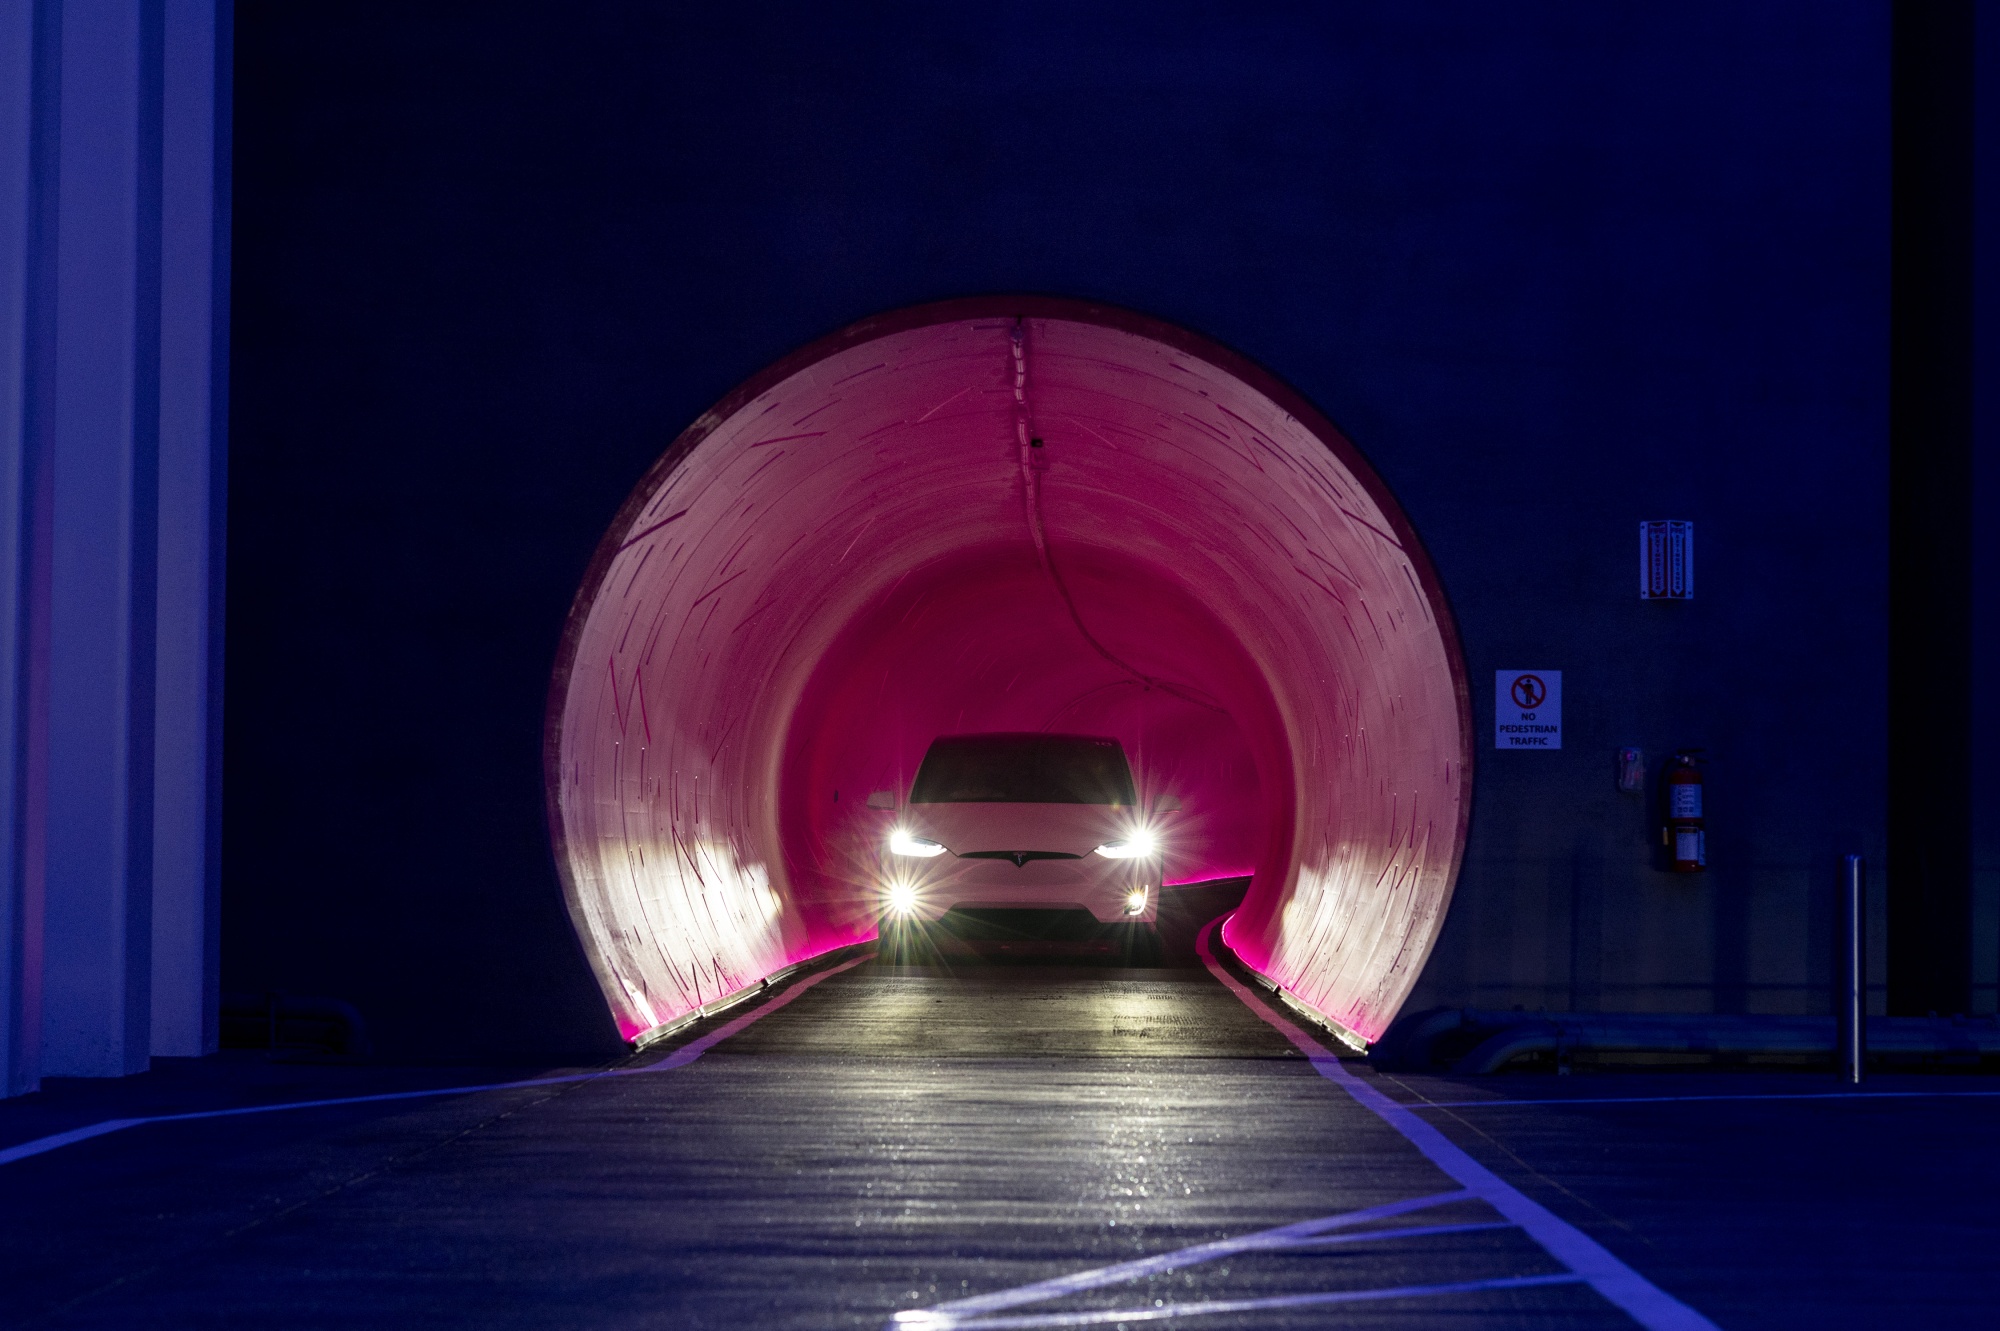 How's this for a cool job - designing tunnels for a living